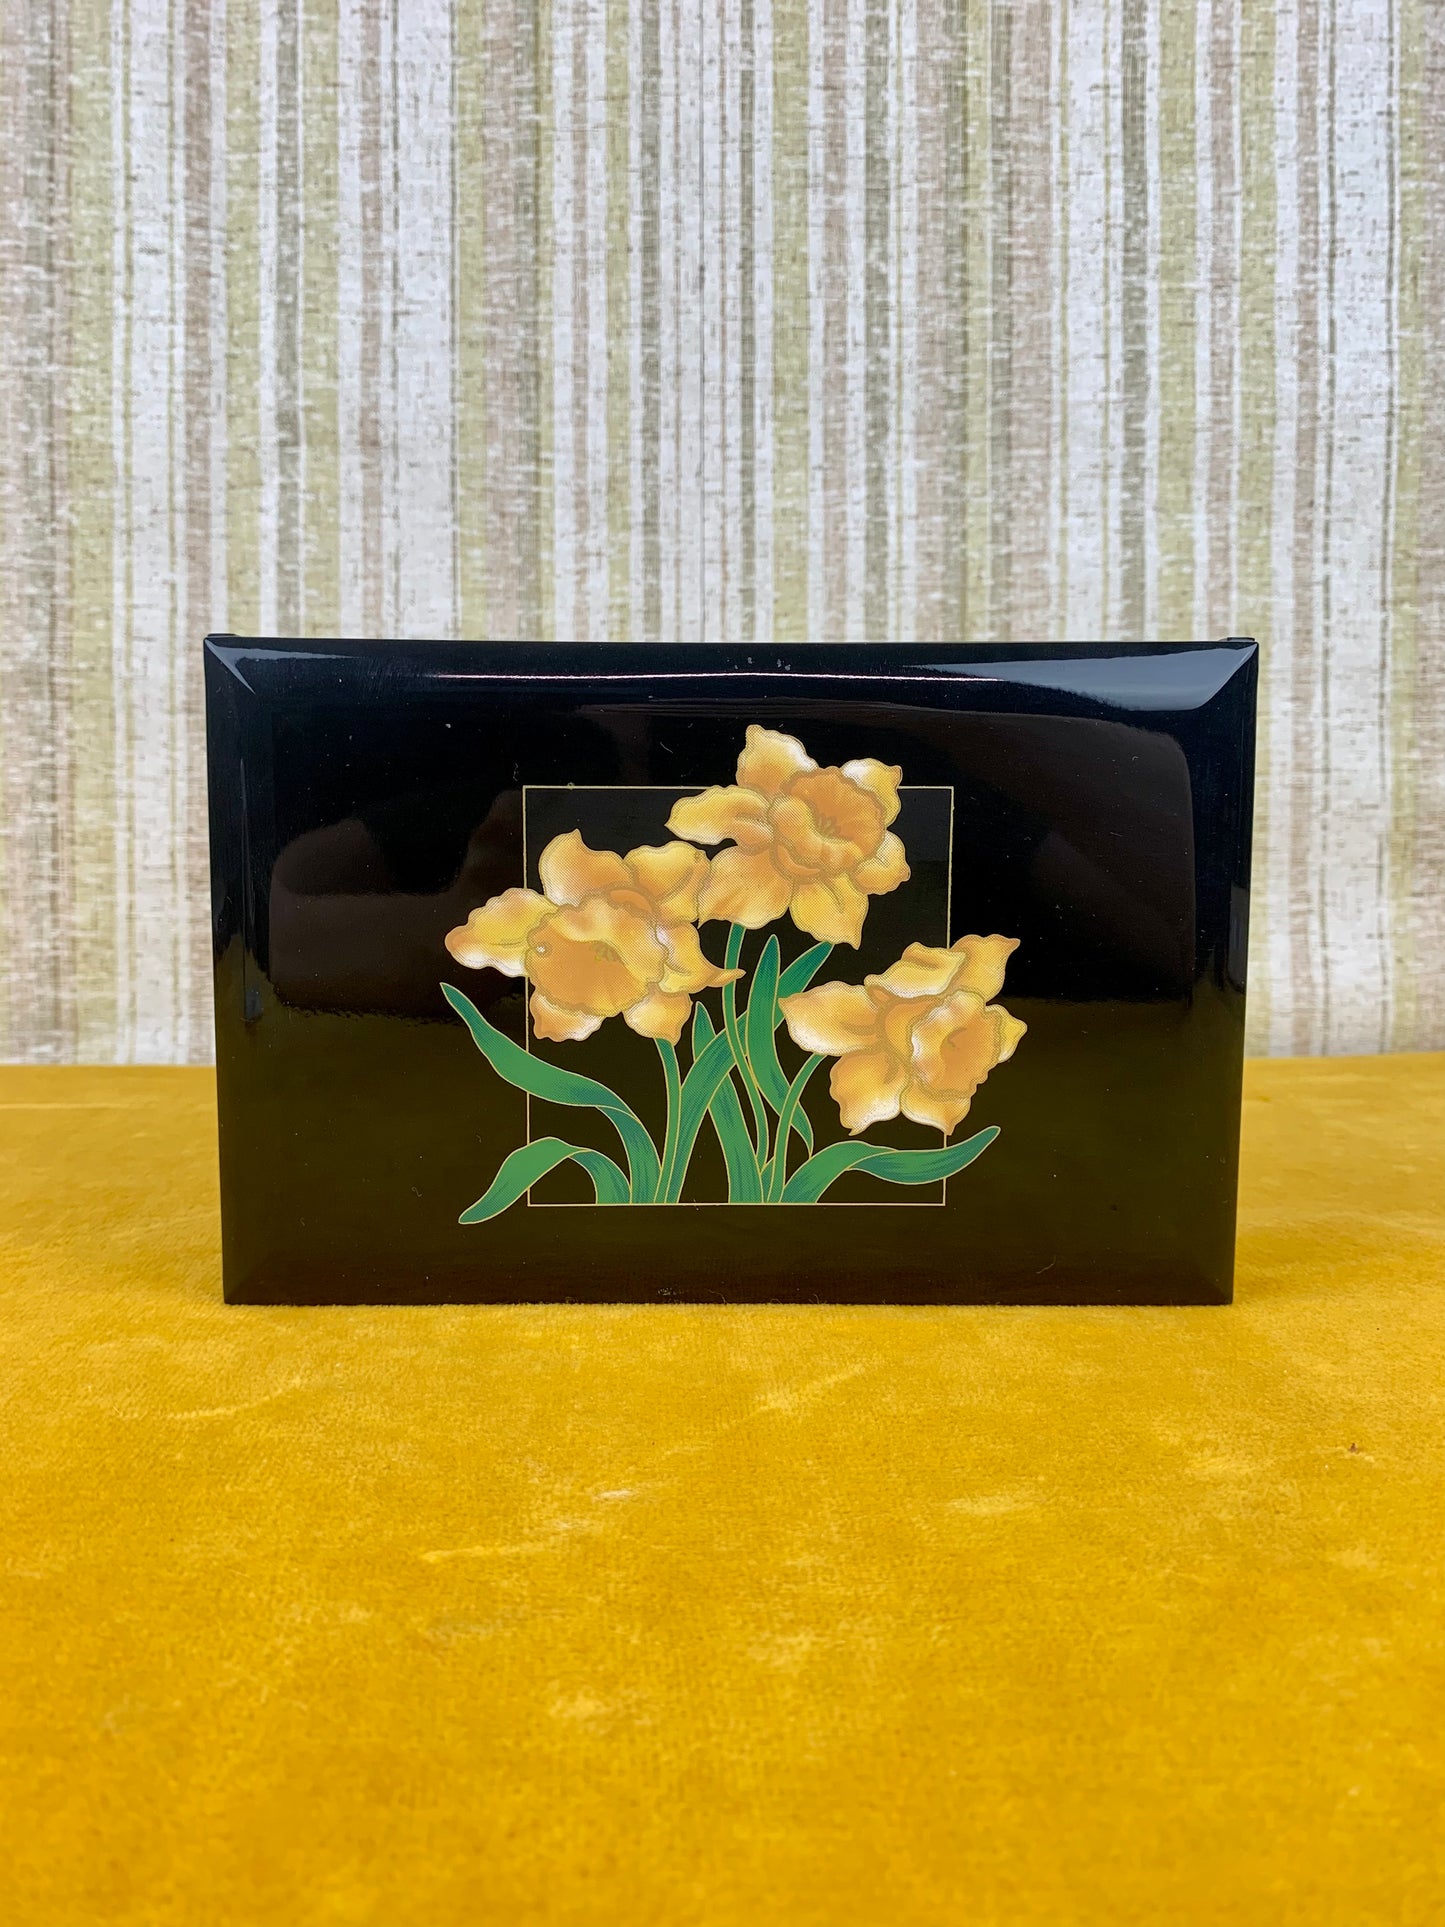 Vintage Lacquerware Mirrored Musical Jewelry Box - Yellow Daffodils - Made in Japan